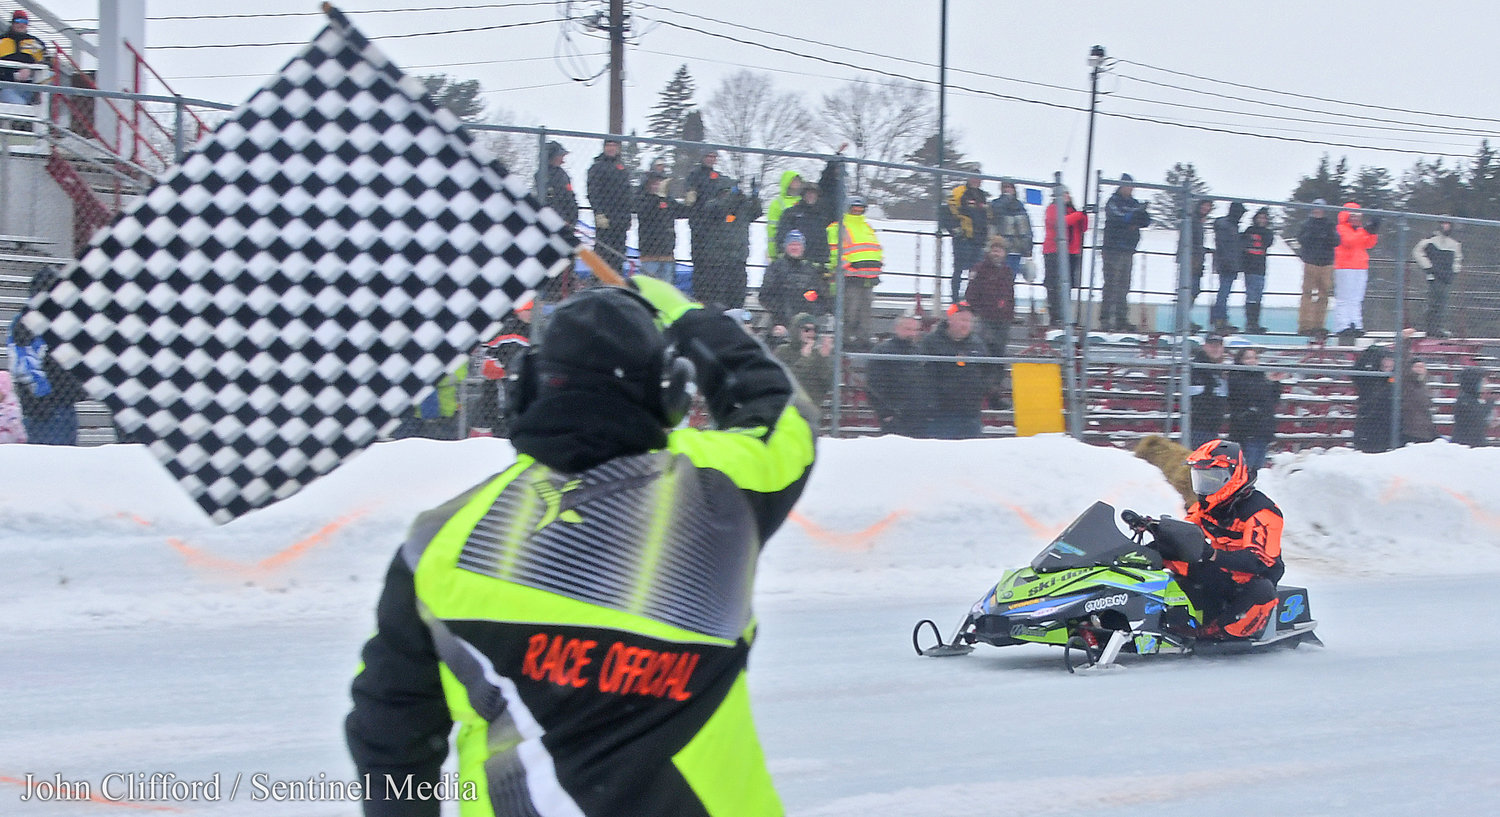 Getting the win- Jamie Bourgeois from Boonville blasts by the flag stand and wins the  2023 Pro Champ Adirondack Cup  Sunday, January 29 a the Boonville Fairgrounds.